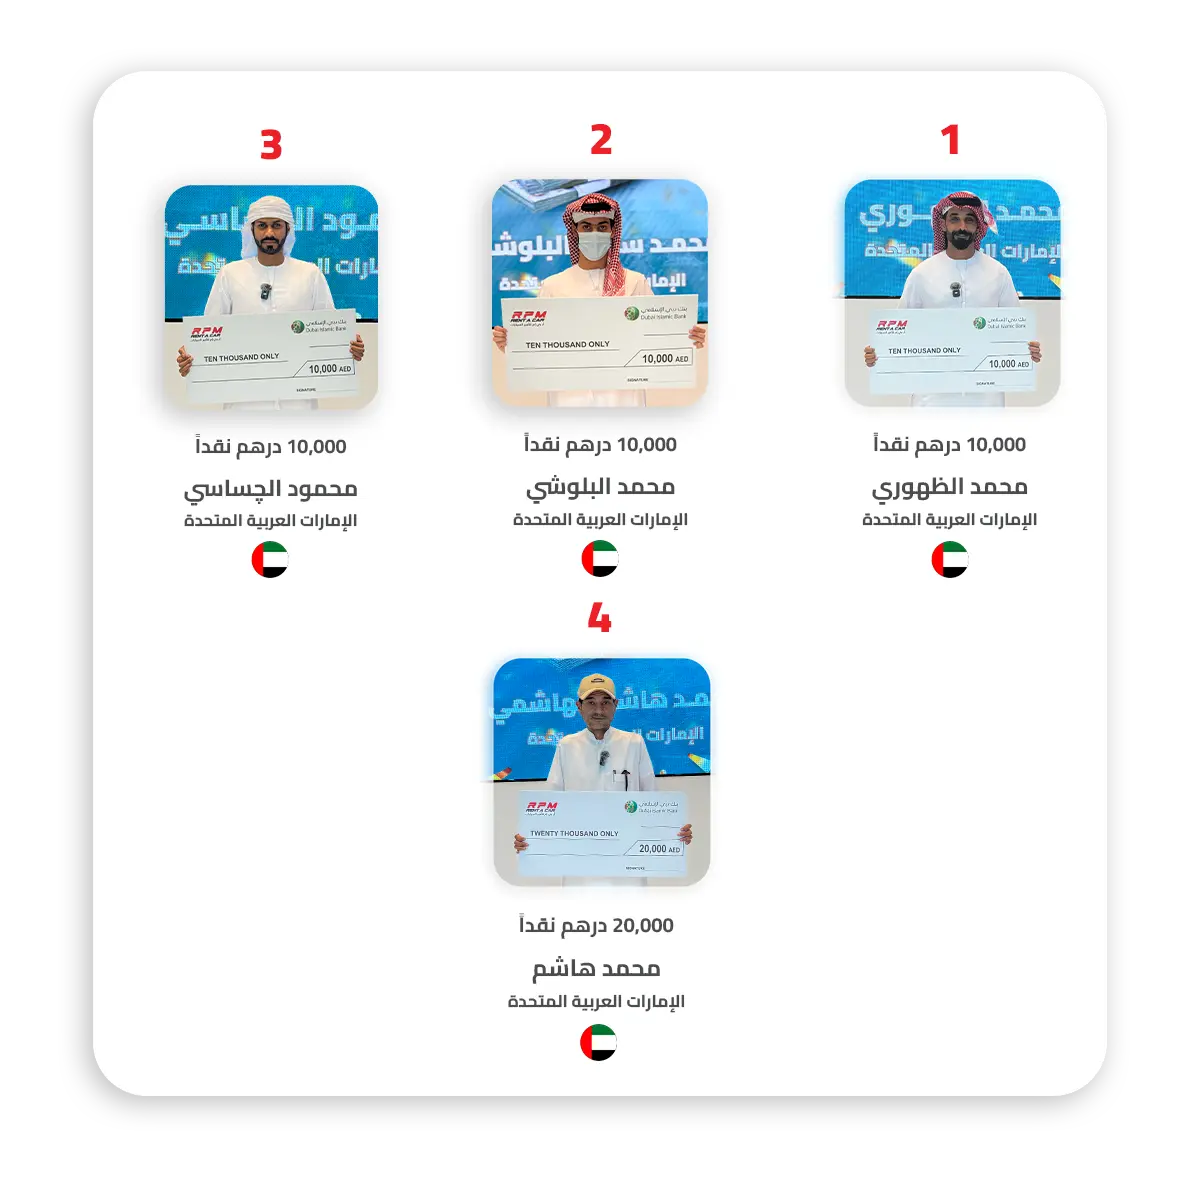 05 Winners From 10,000 AED Cash Arabic